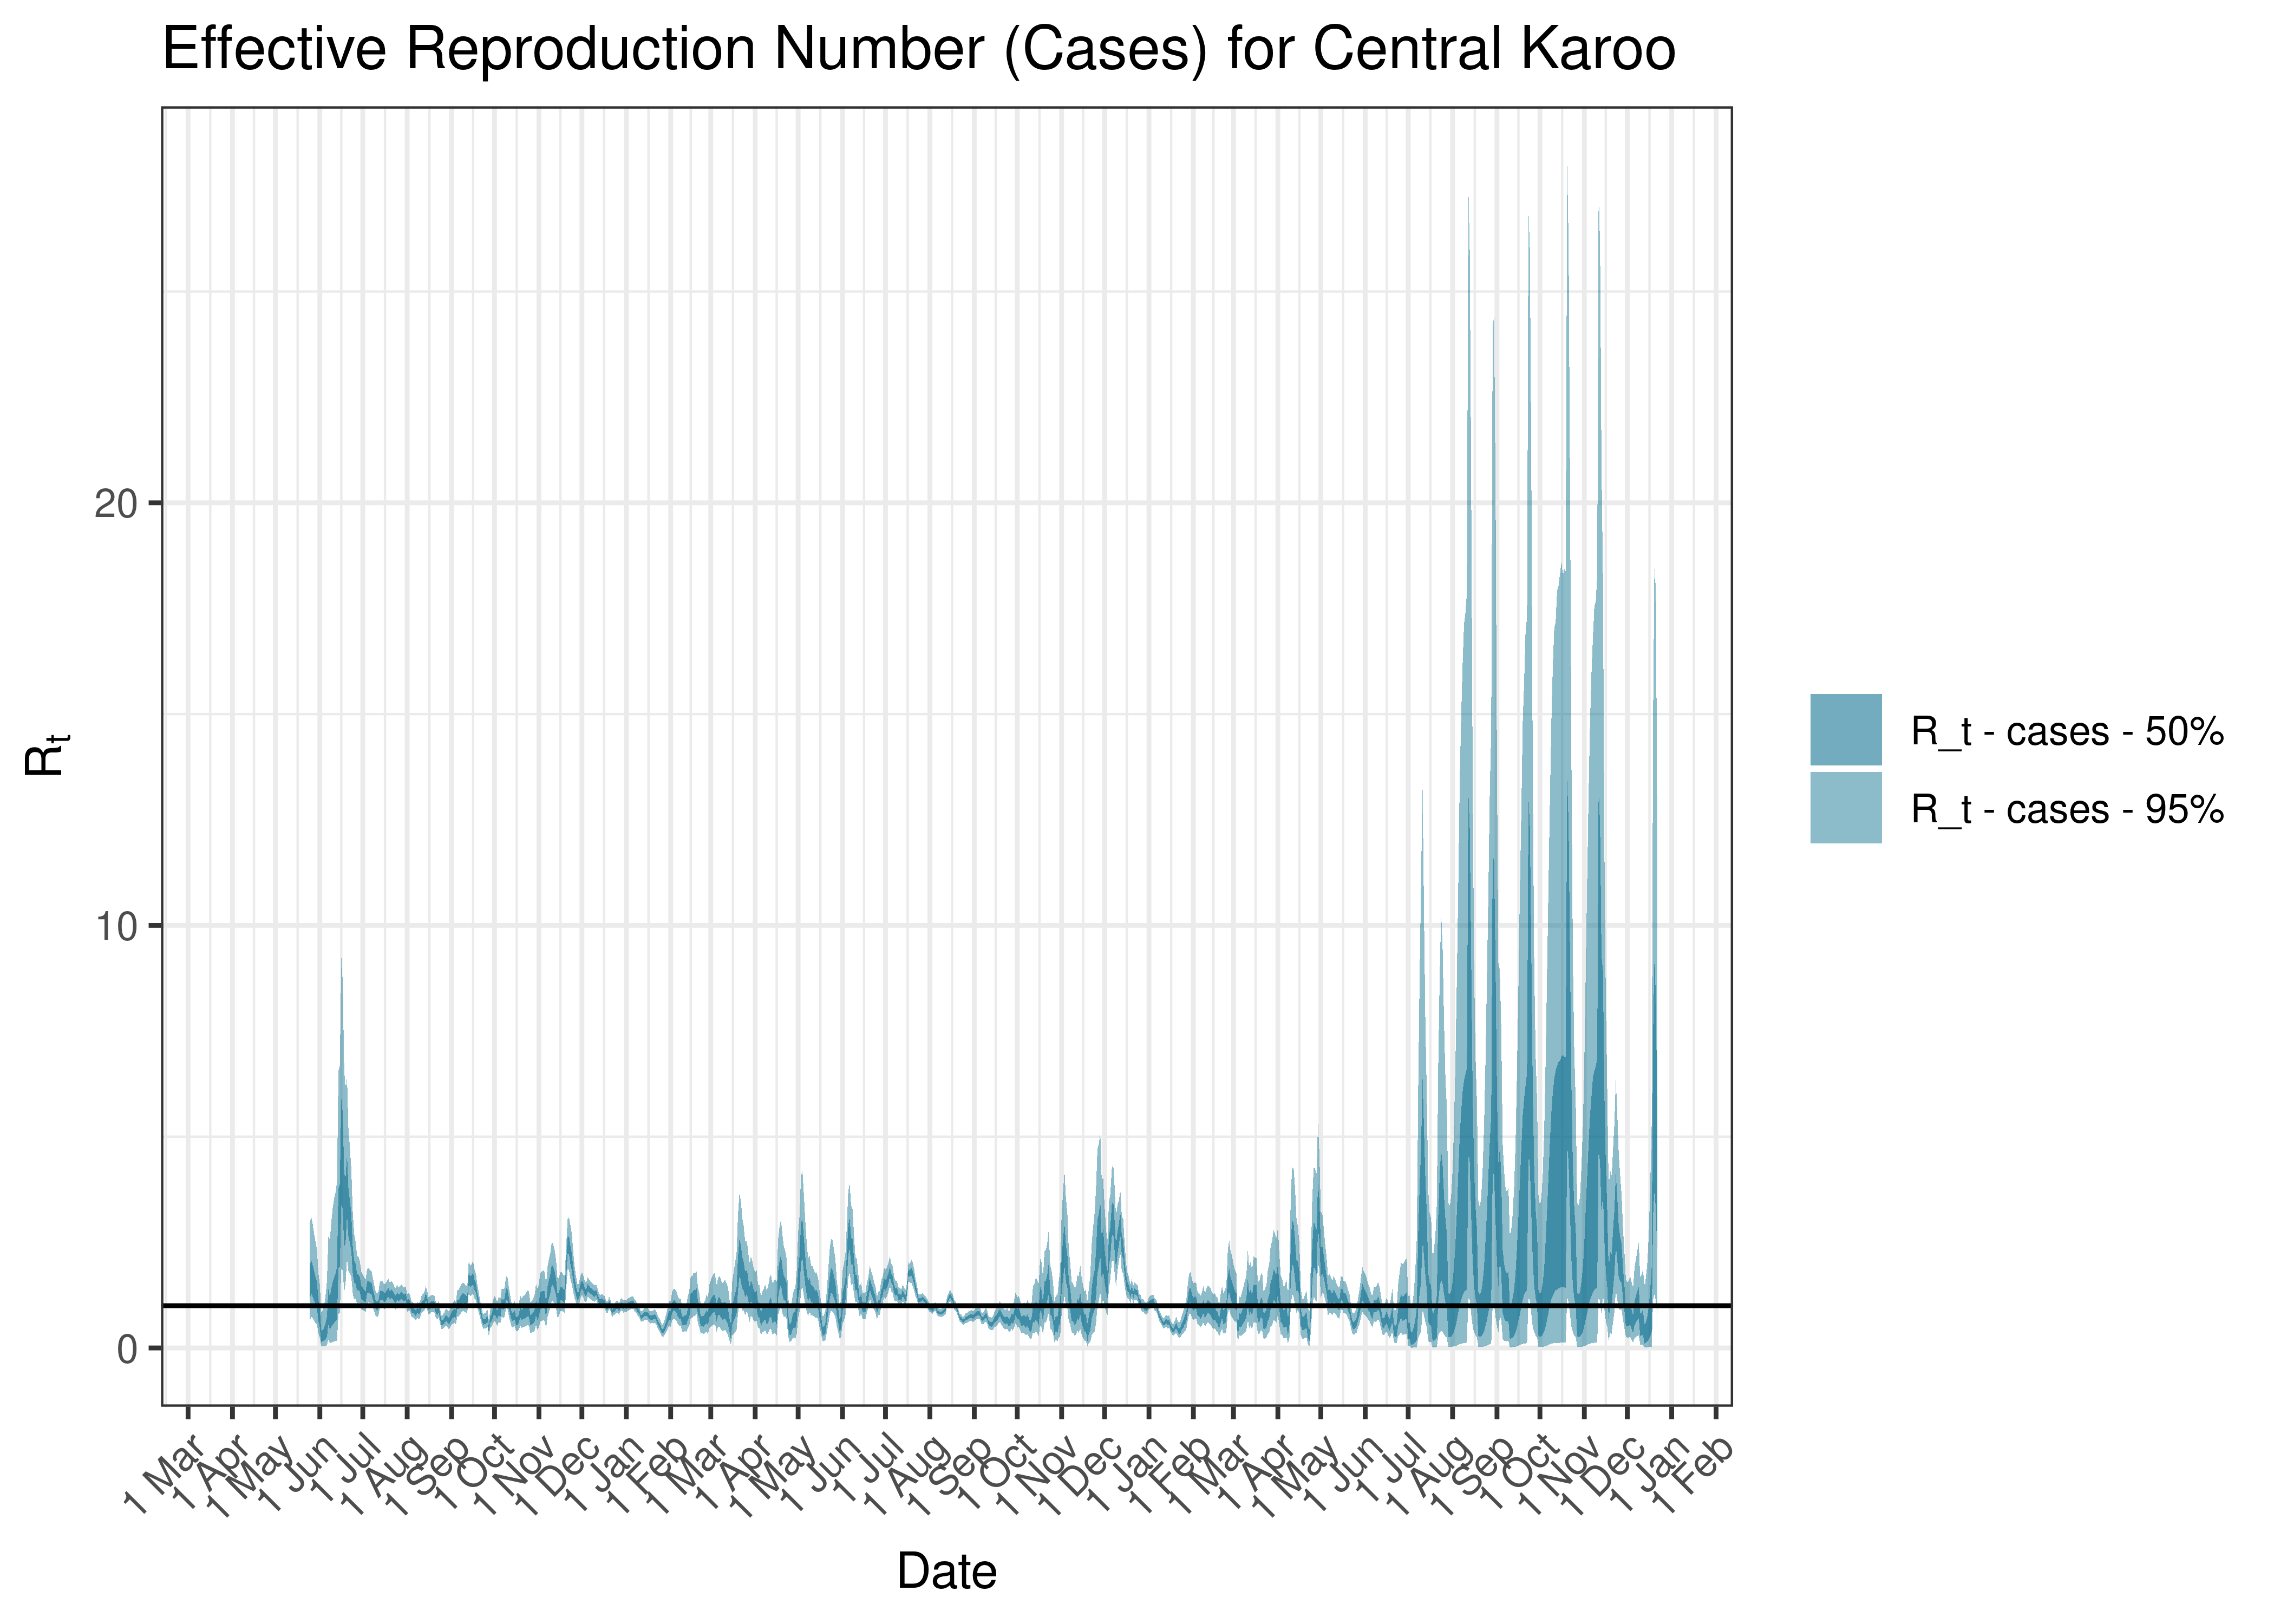 Estimated Effective Reproduction Number Based on Cases for Central Karoo since 1 April 2020